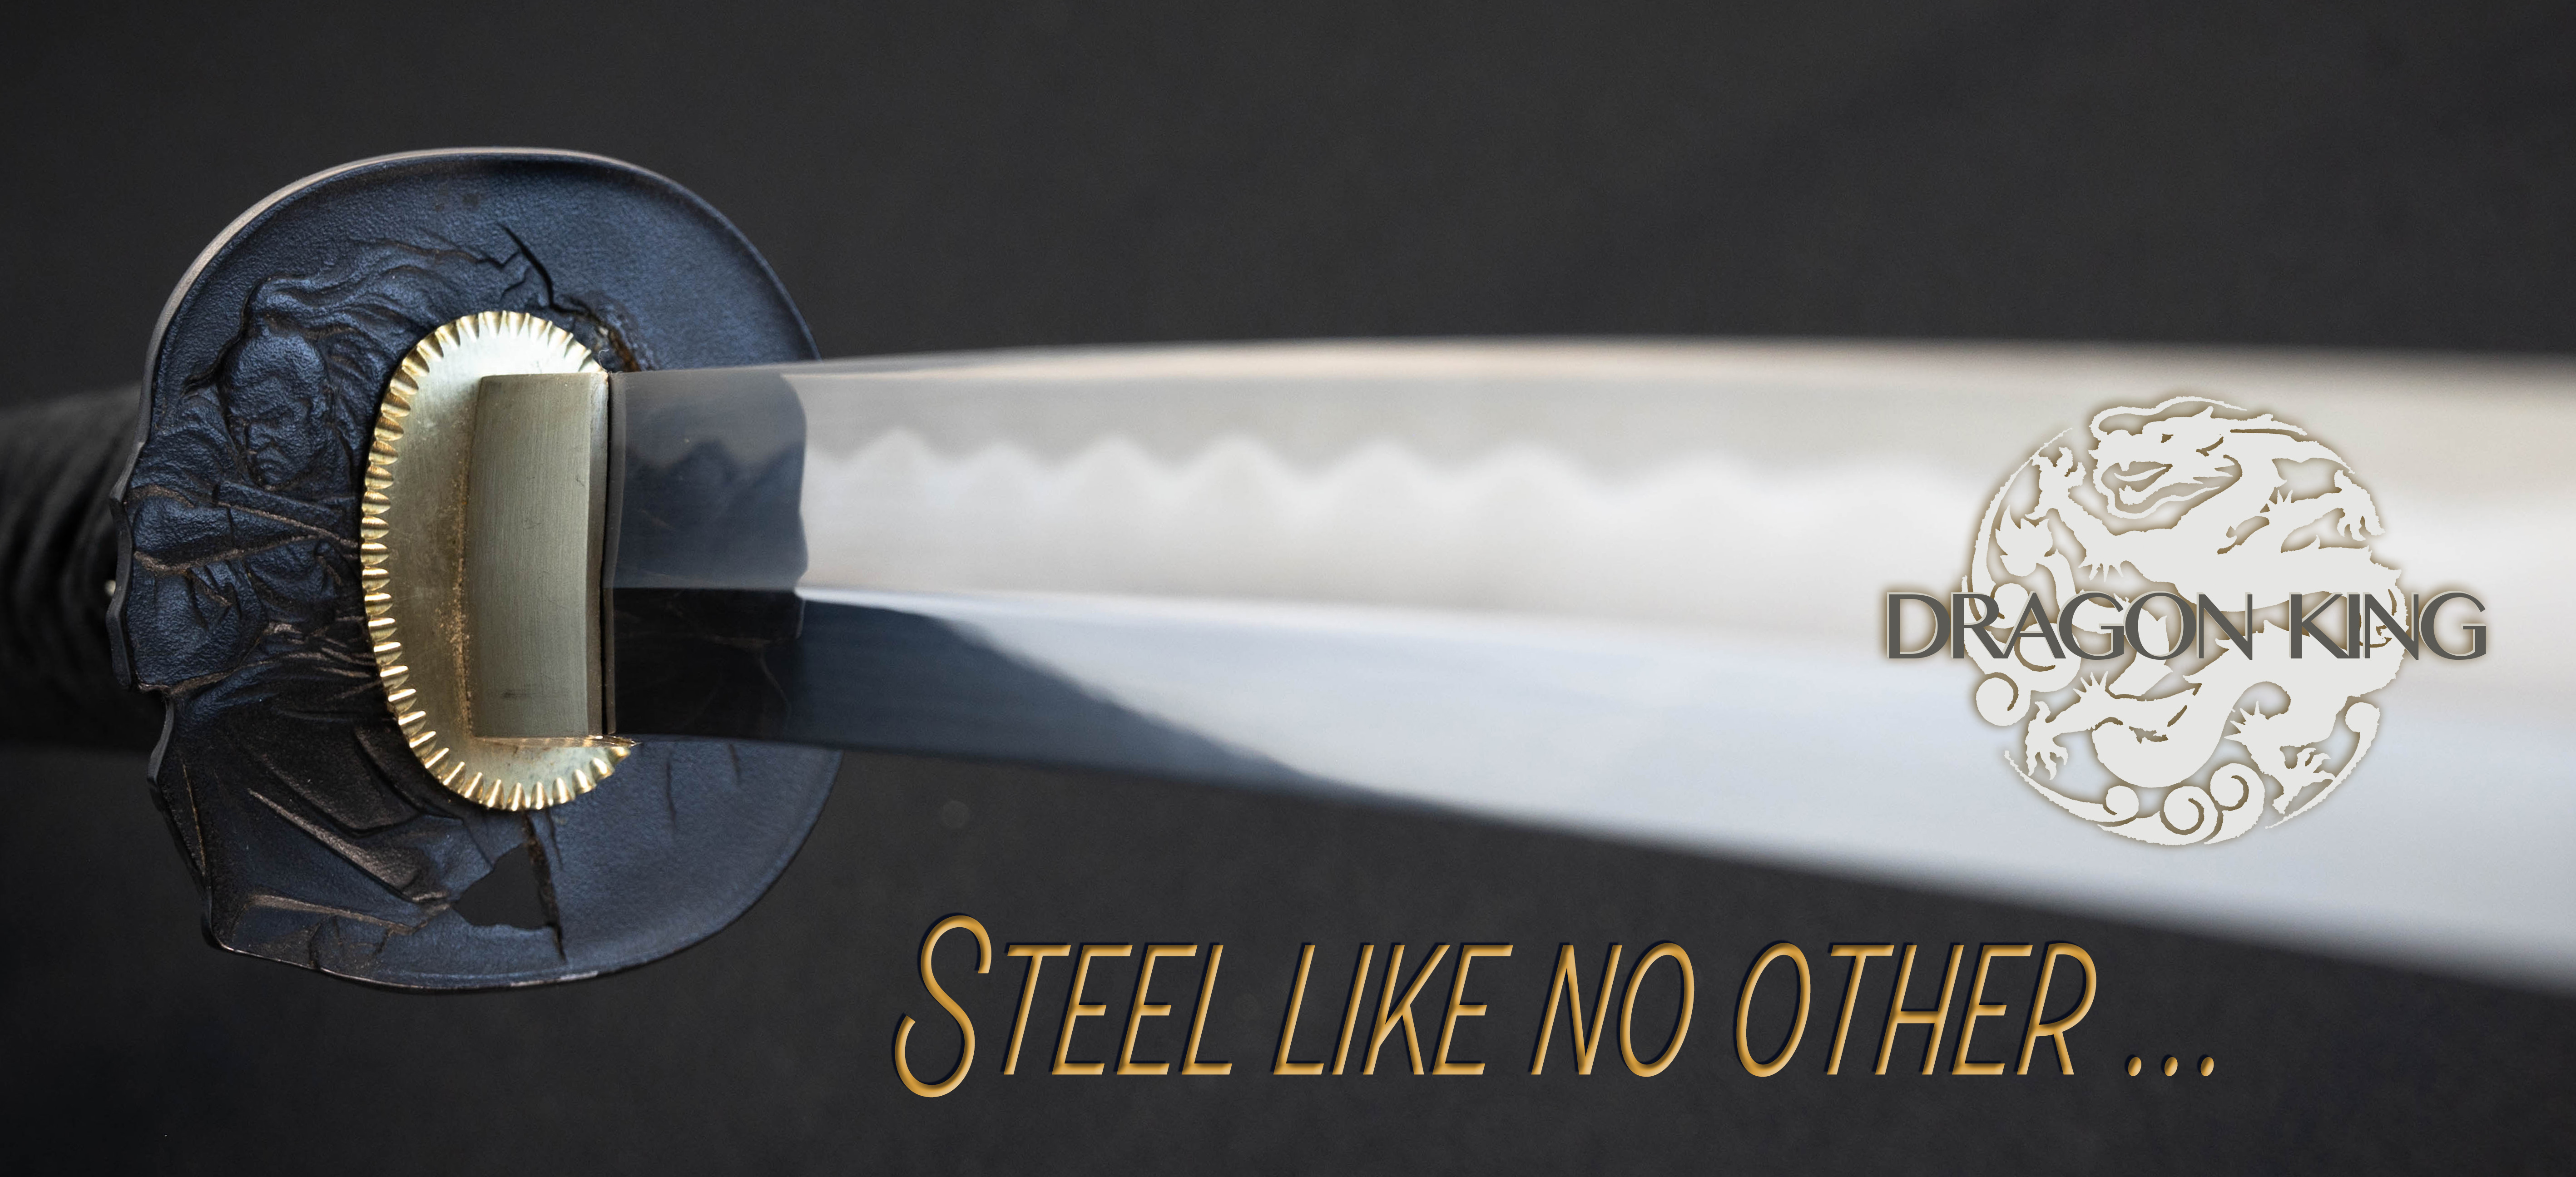 Steel like no other